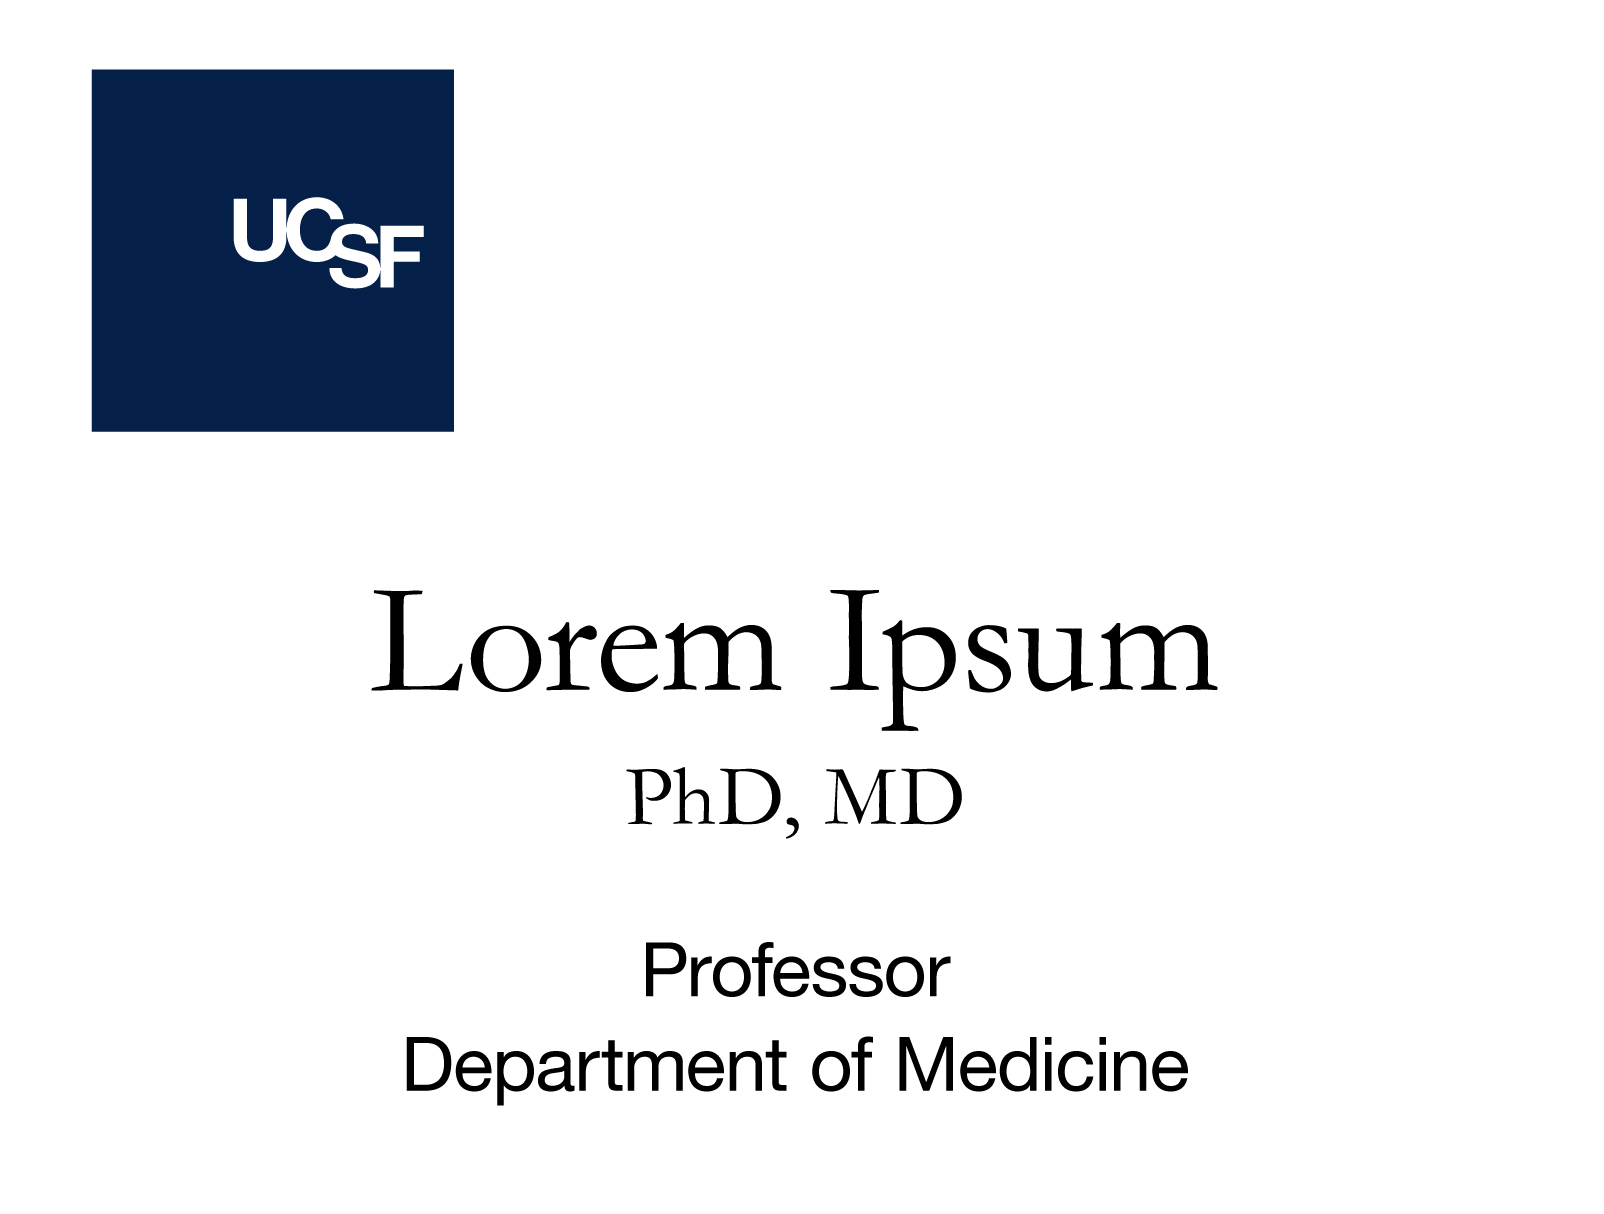 ucsf name badge with logo expression